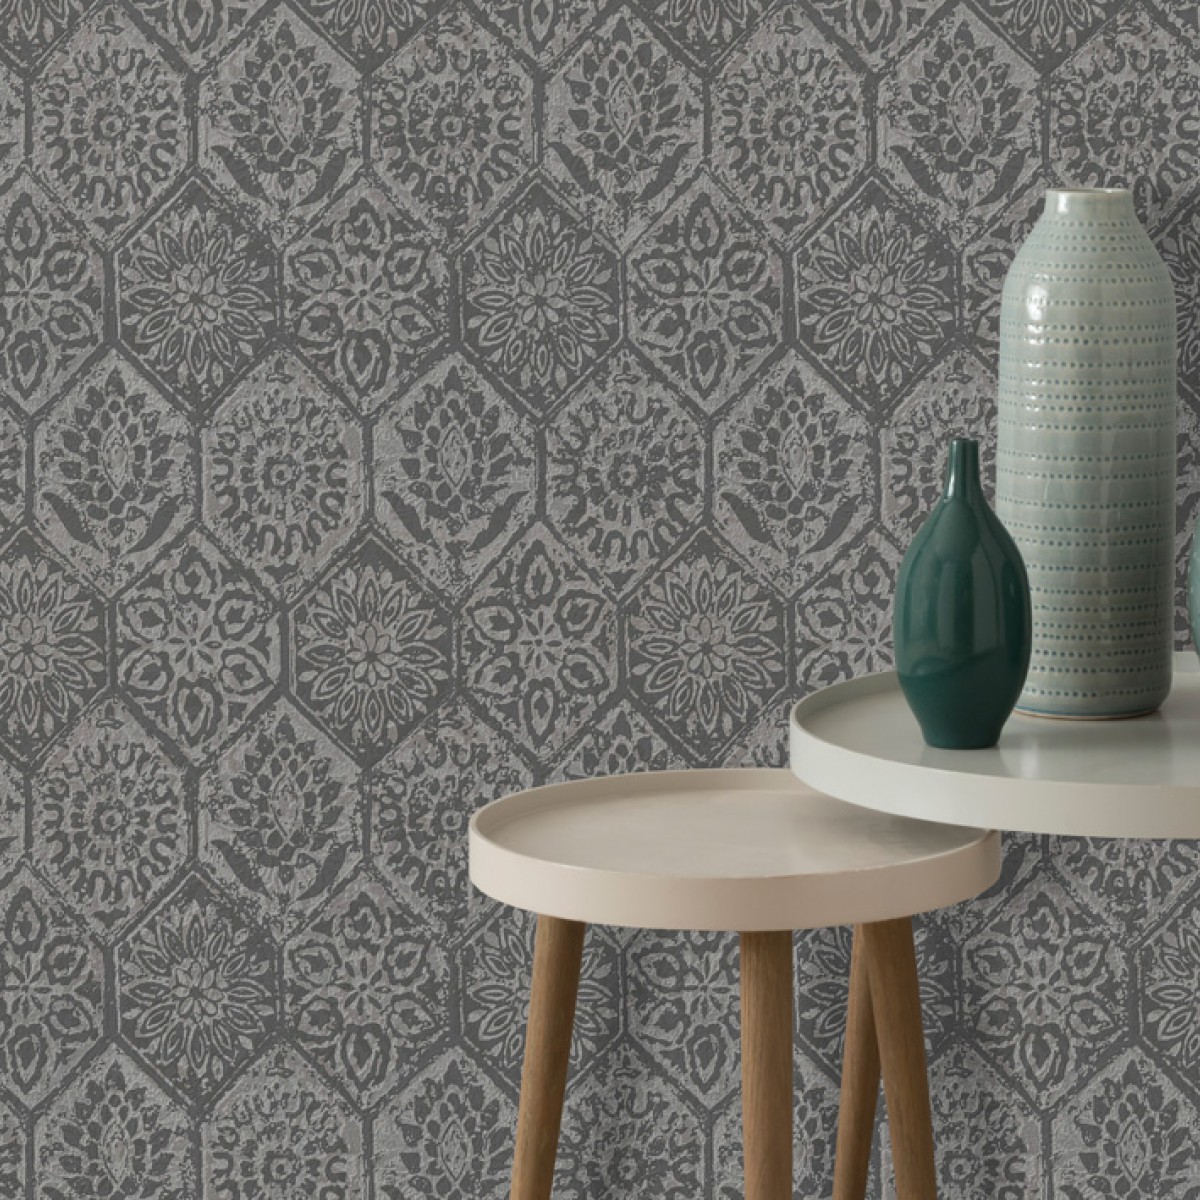 Tapet Palazzo, Marble Silver Grey Luxury Tile, 1838 Wallcoverings, 5.3mp / rola, Tapet living 